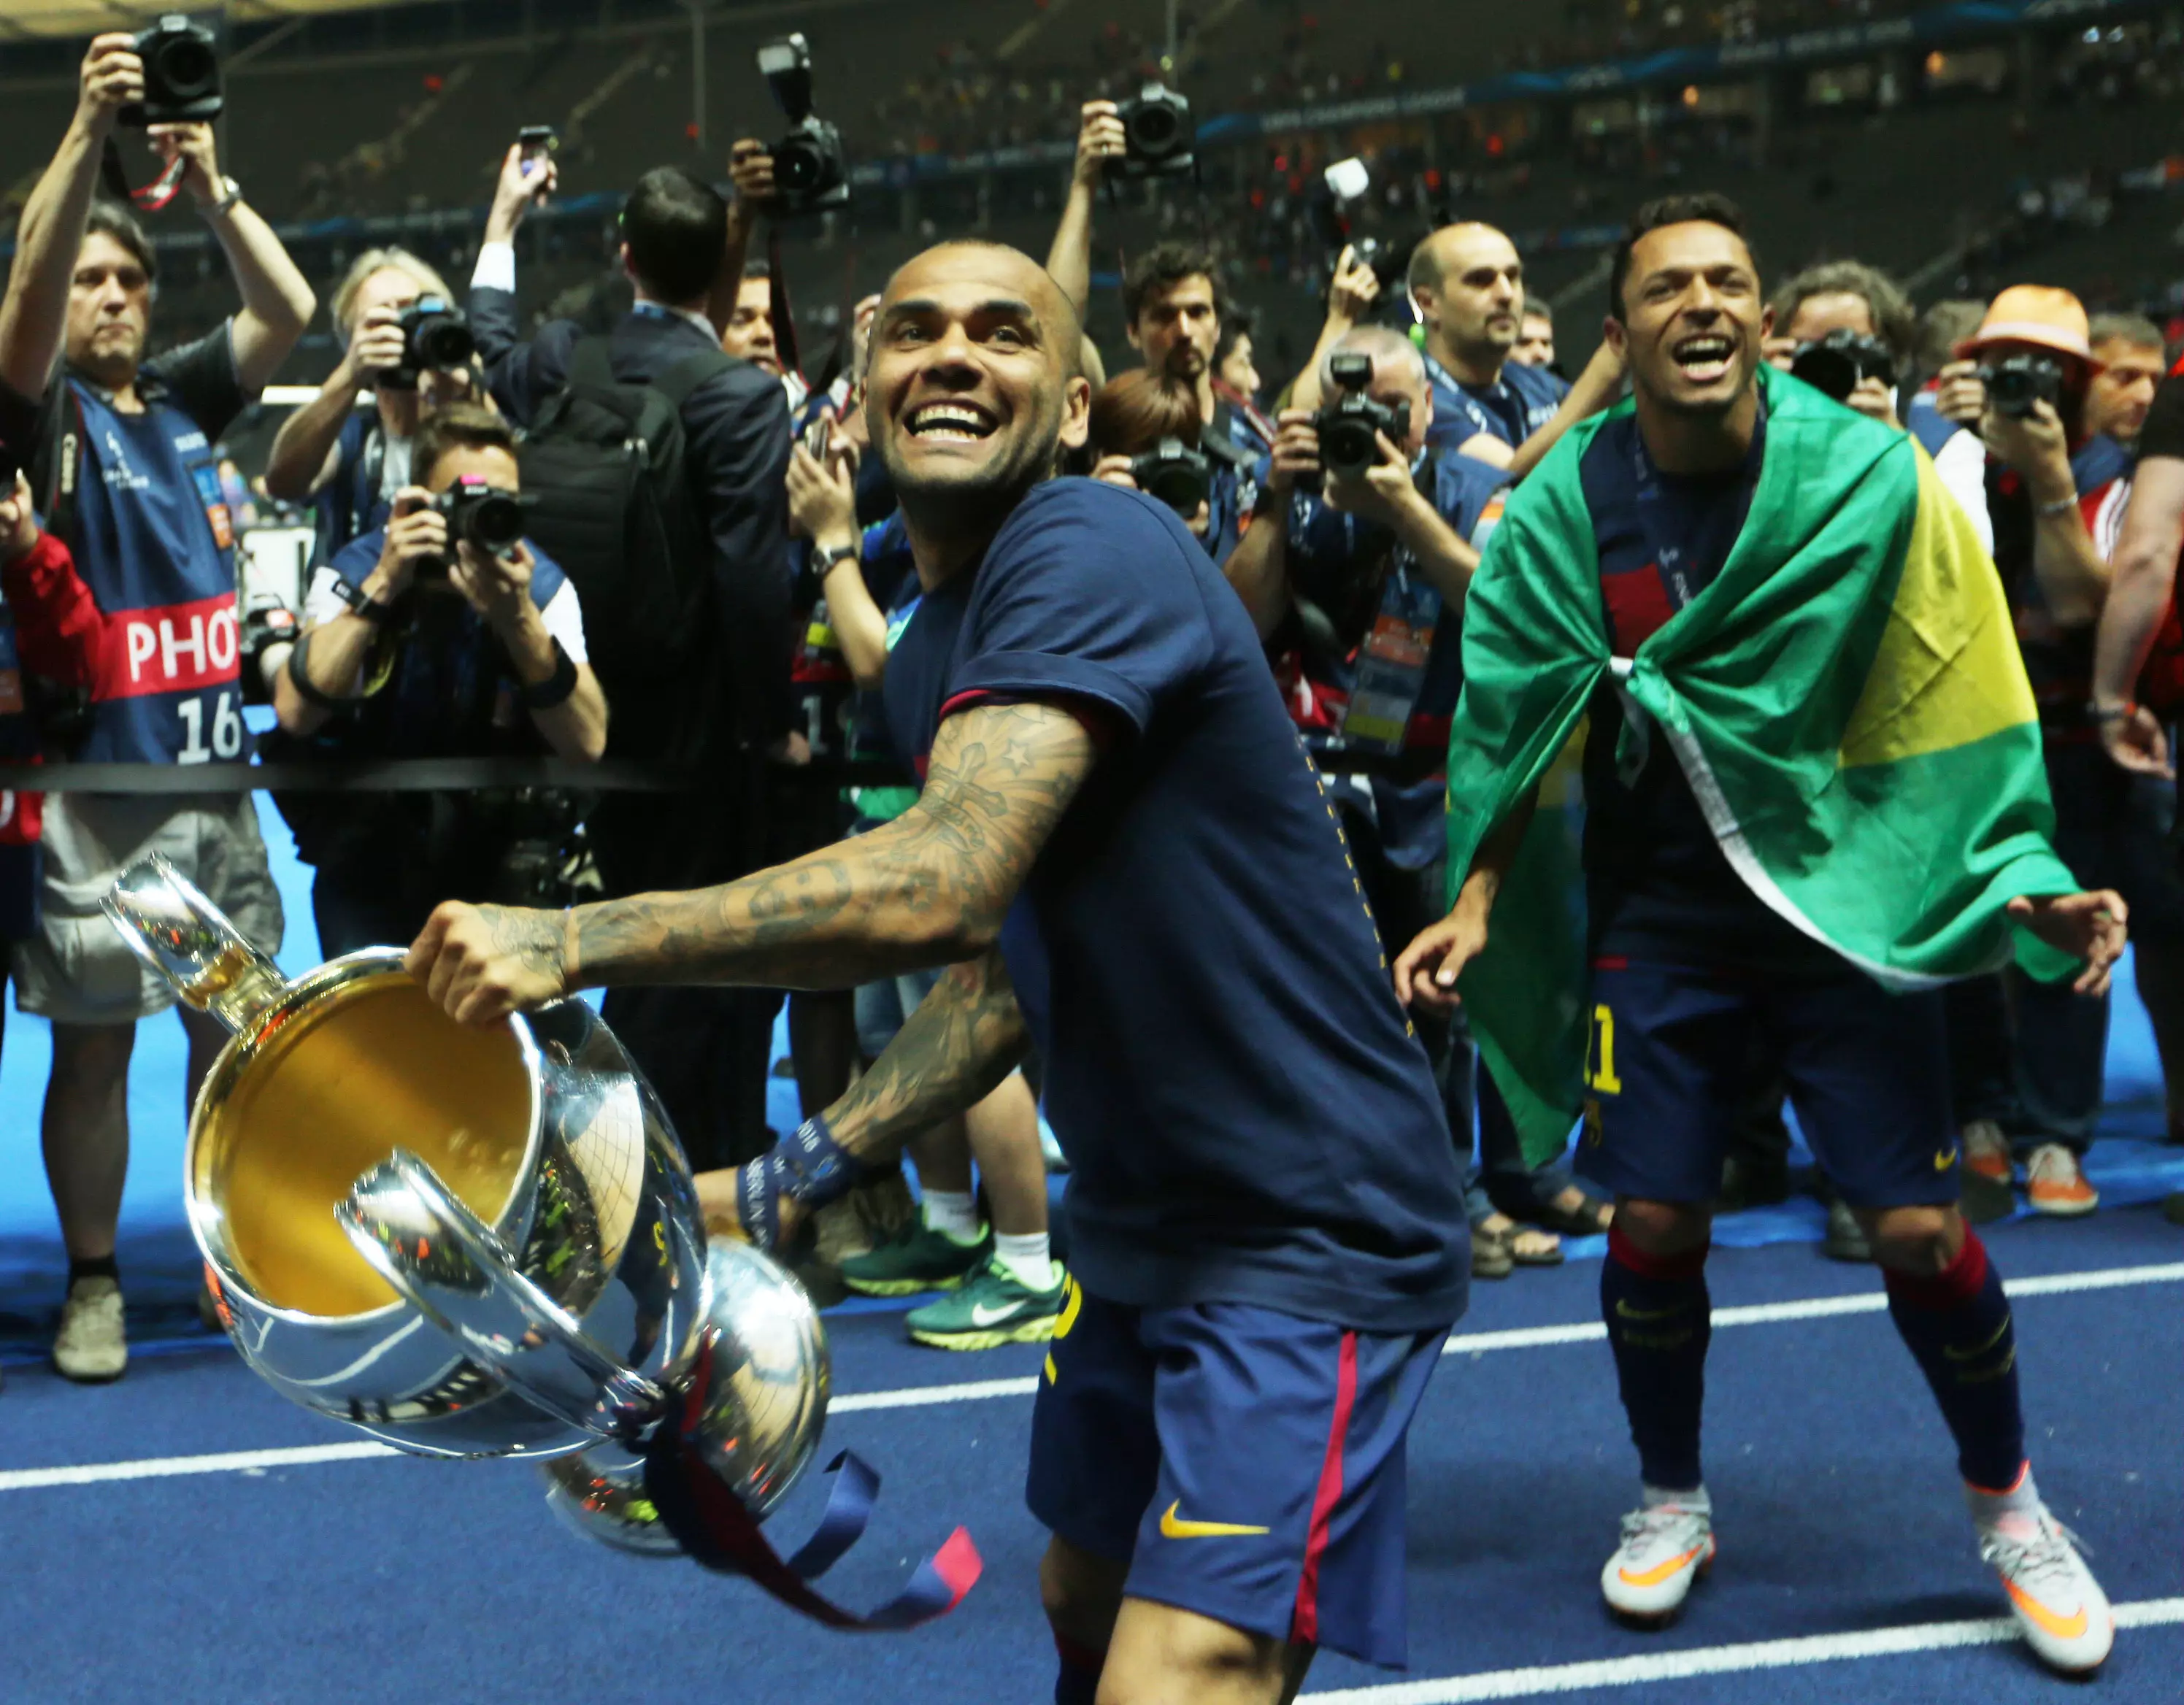 Alves was a serial winner at Barcelona and things haven't changed. Image: PA Images